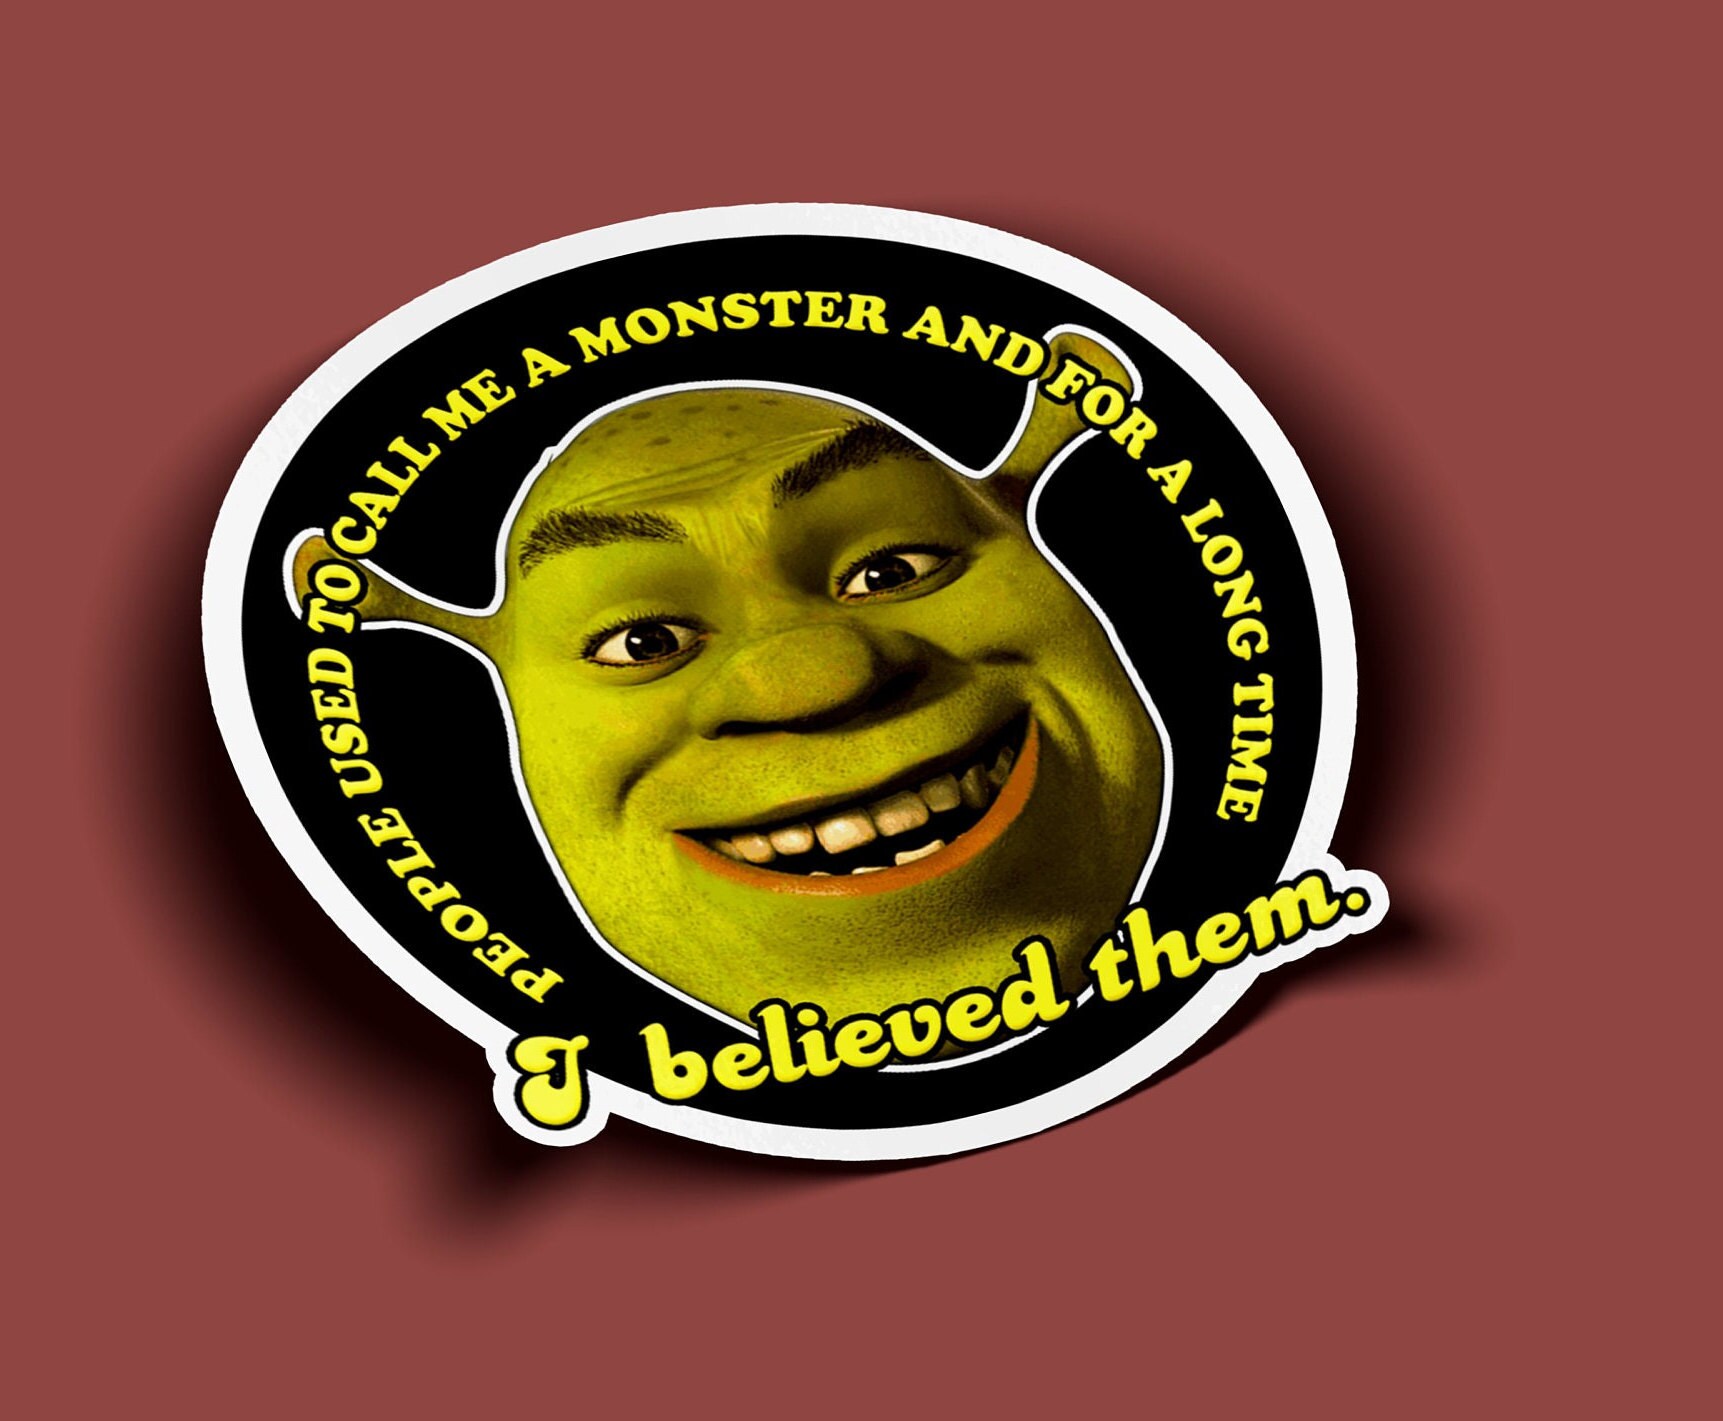 Sign Shrek Sticker by Perecz Annabella for iOS & Android